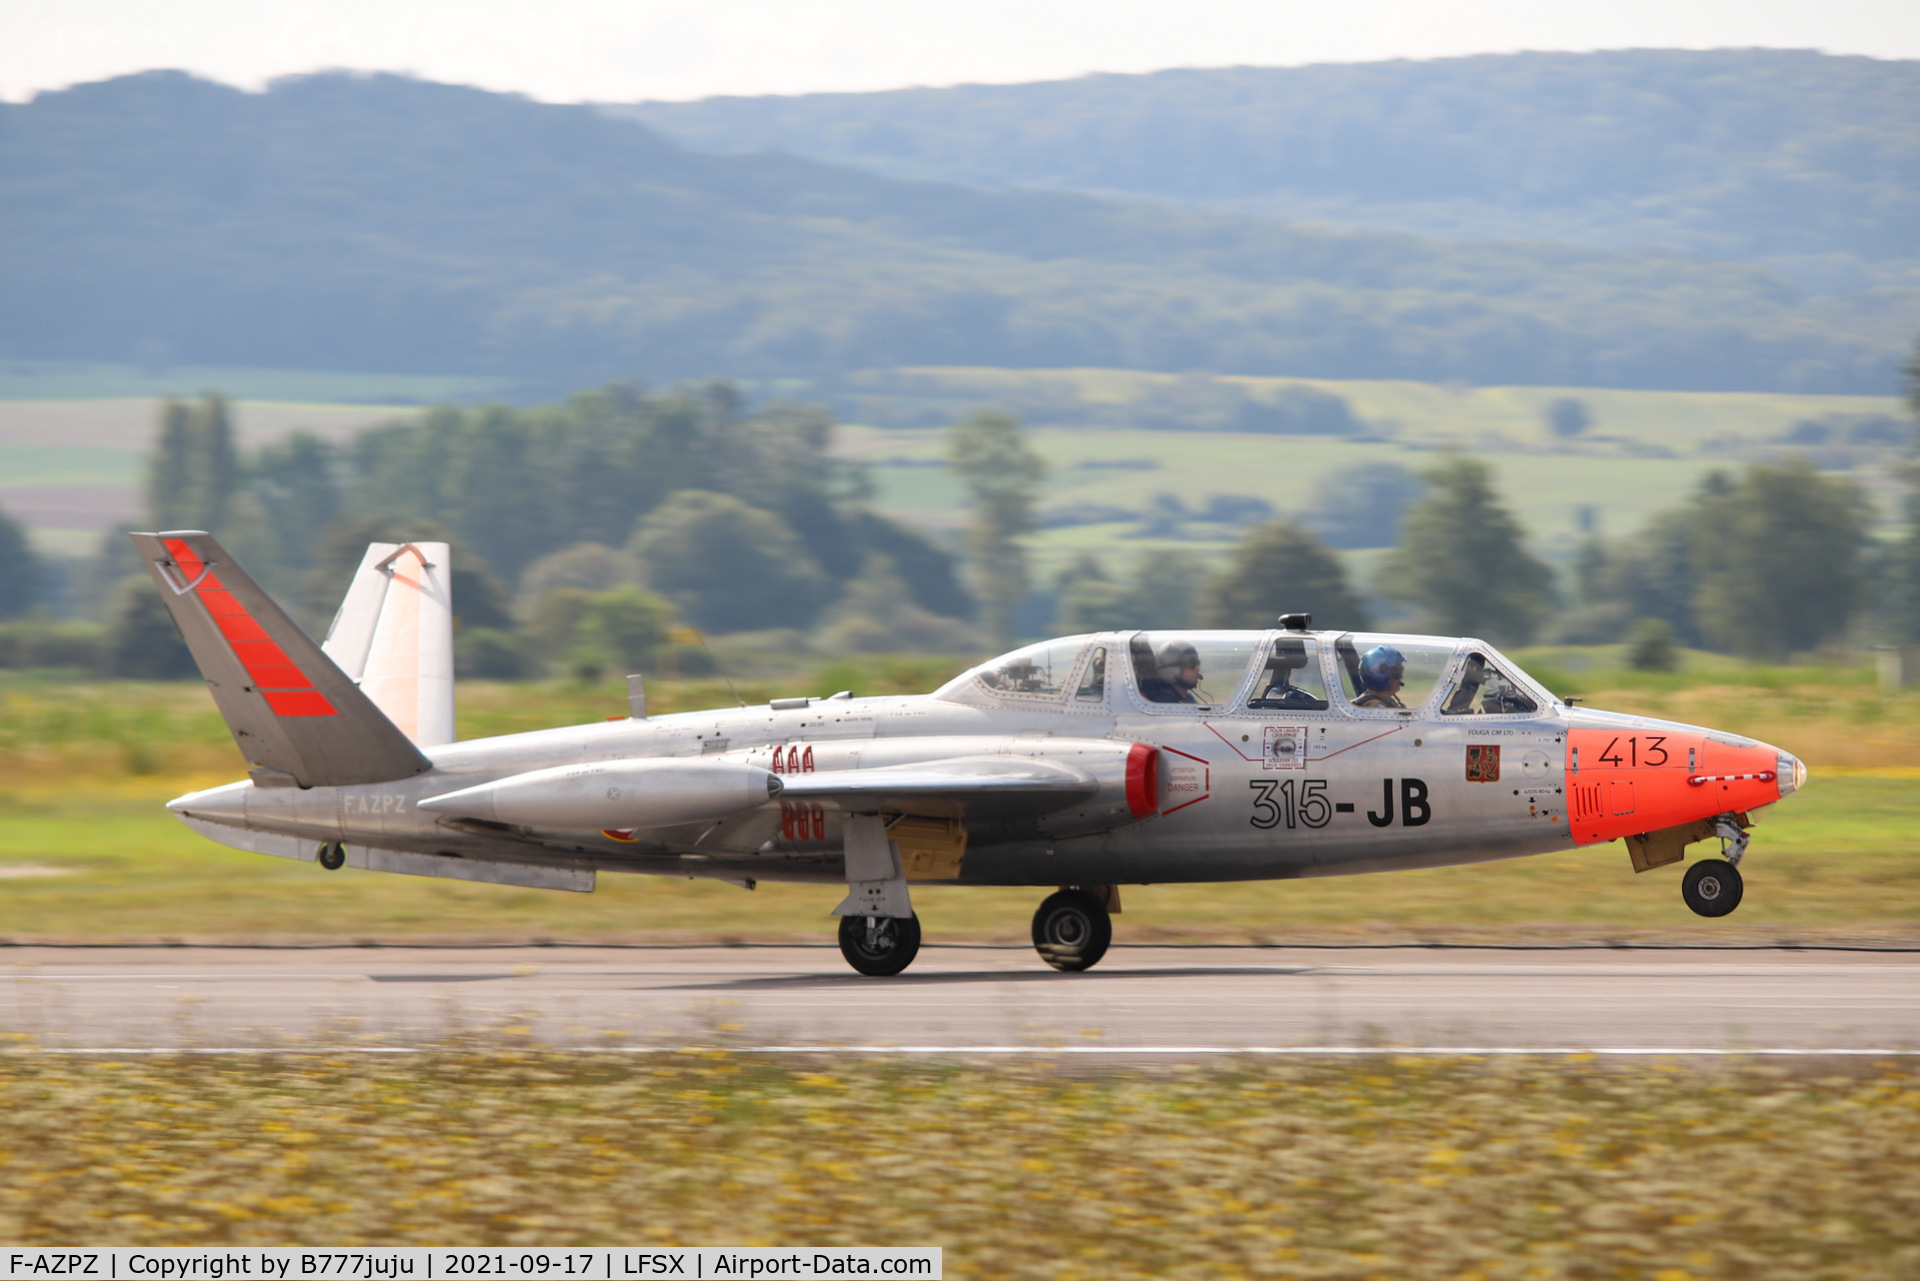 F-AZPZ, 1963 Fouga CM-170 Magister C/N 413, during Luxeuil Airshow 2021